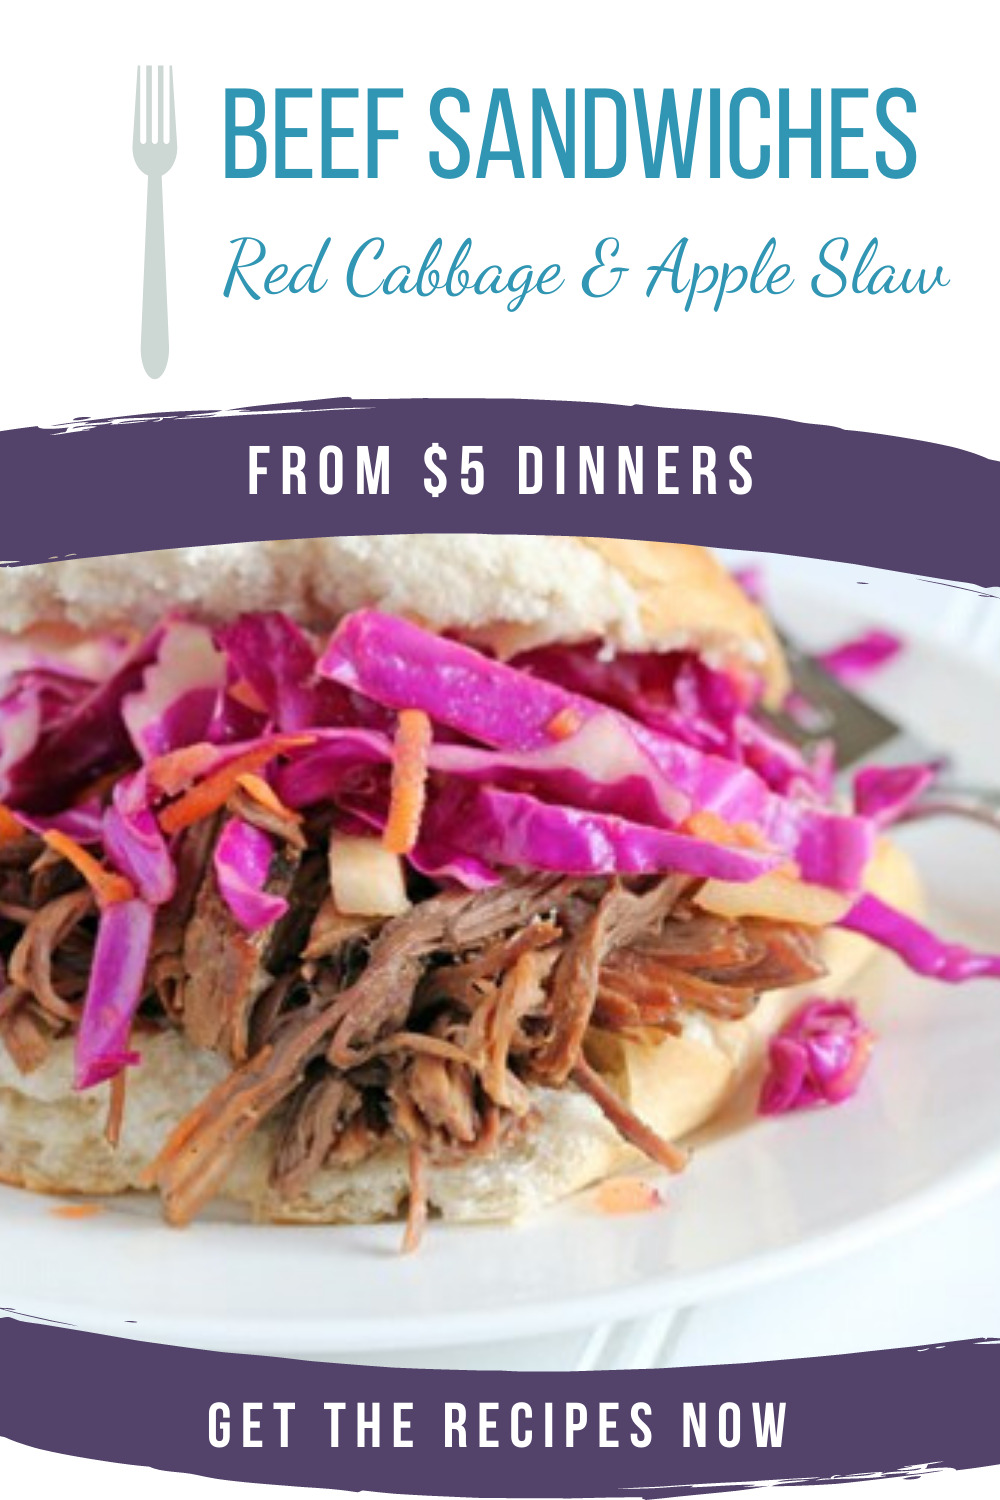 shredded beef sandwiches with red cabbage and apple slaw